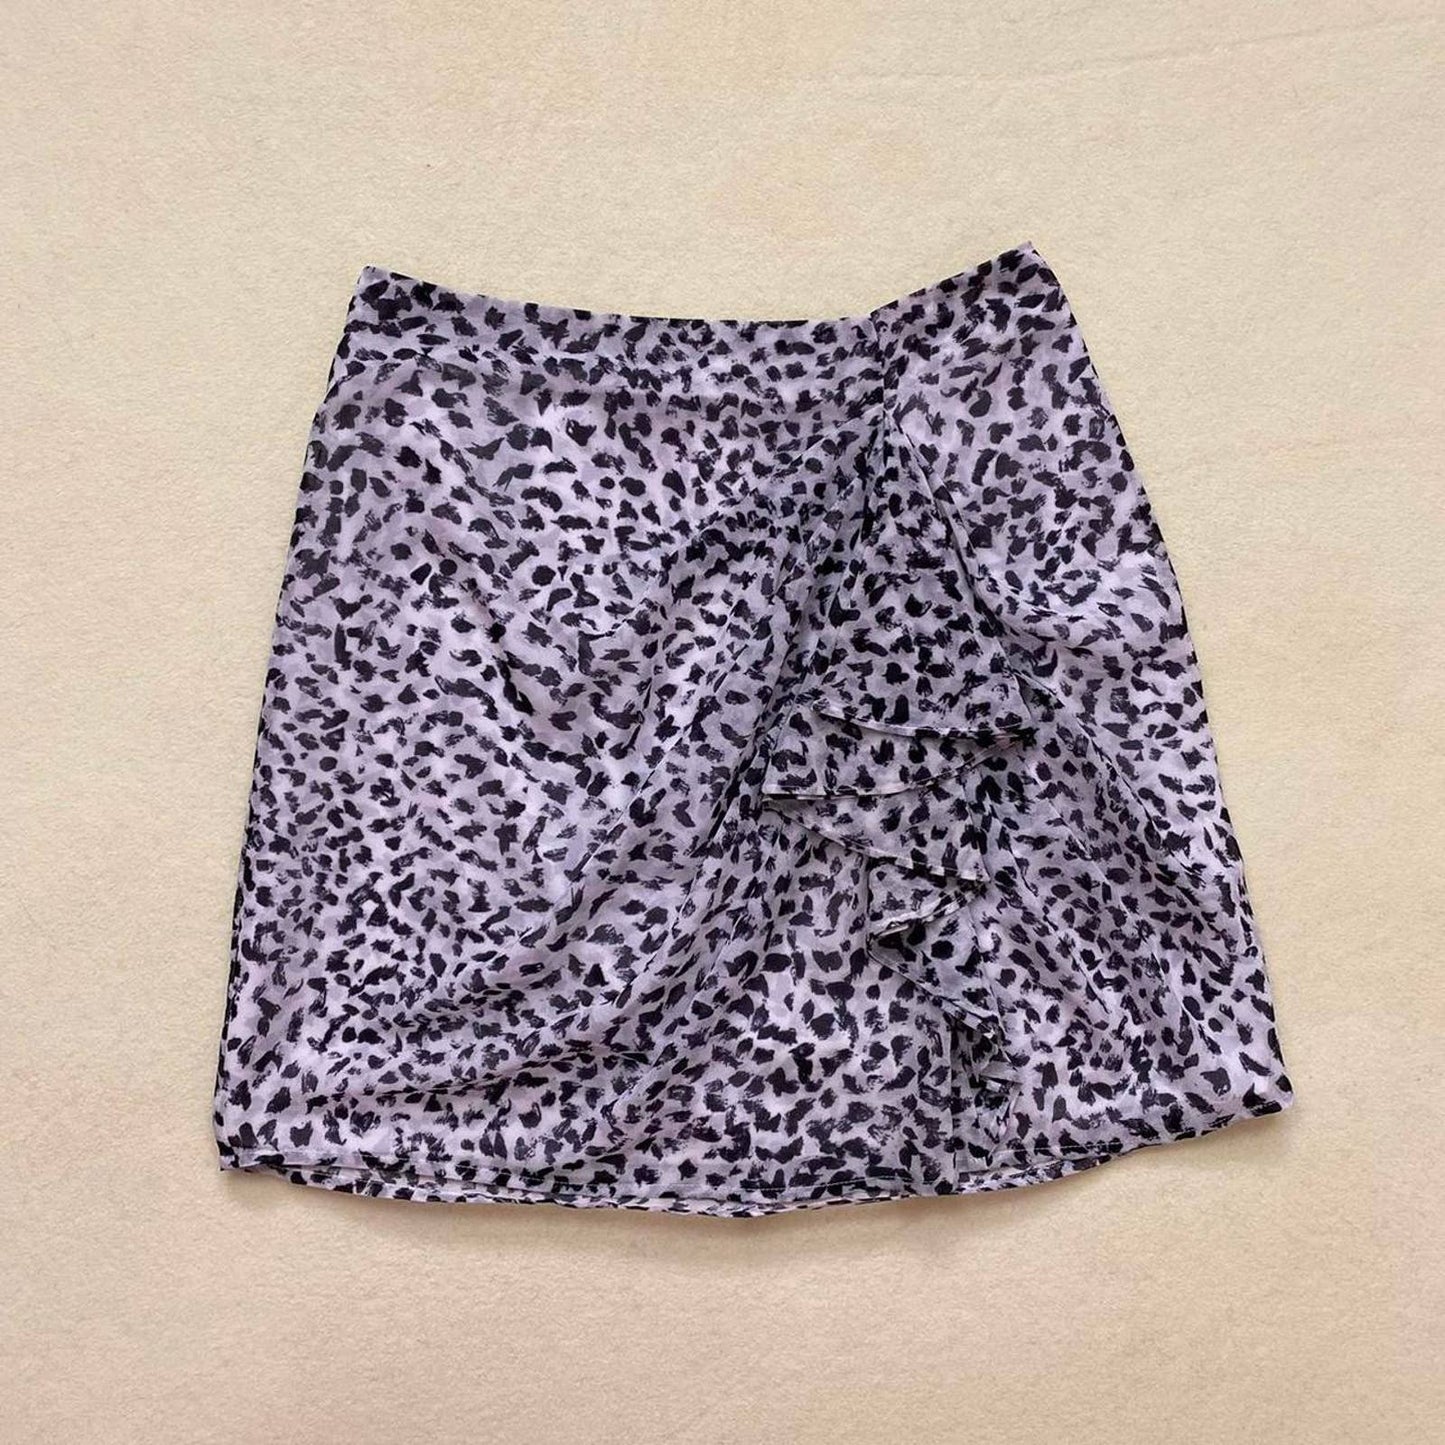 Secondhand C/MEO Collective Leopard Print Mini Skirt - Sample, Size Small